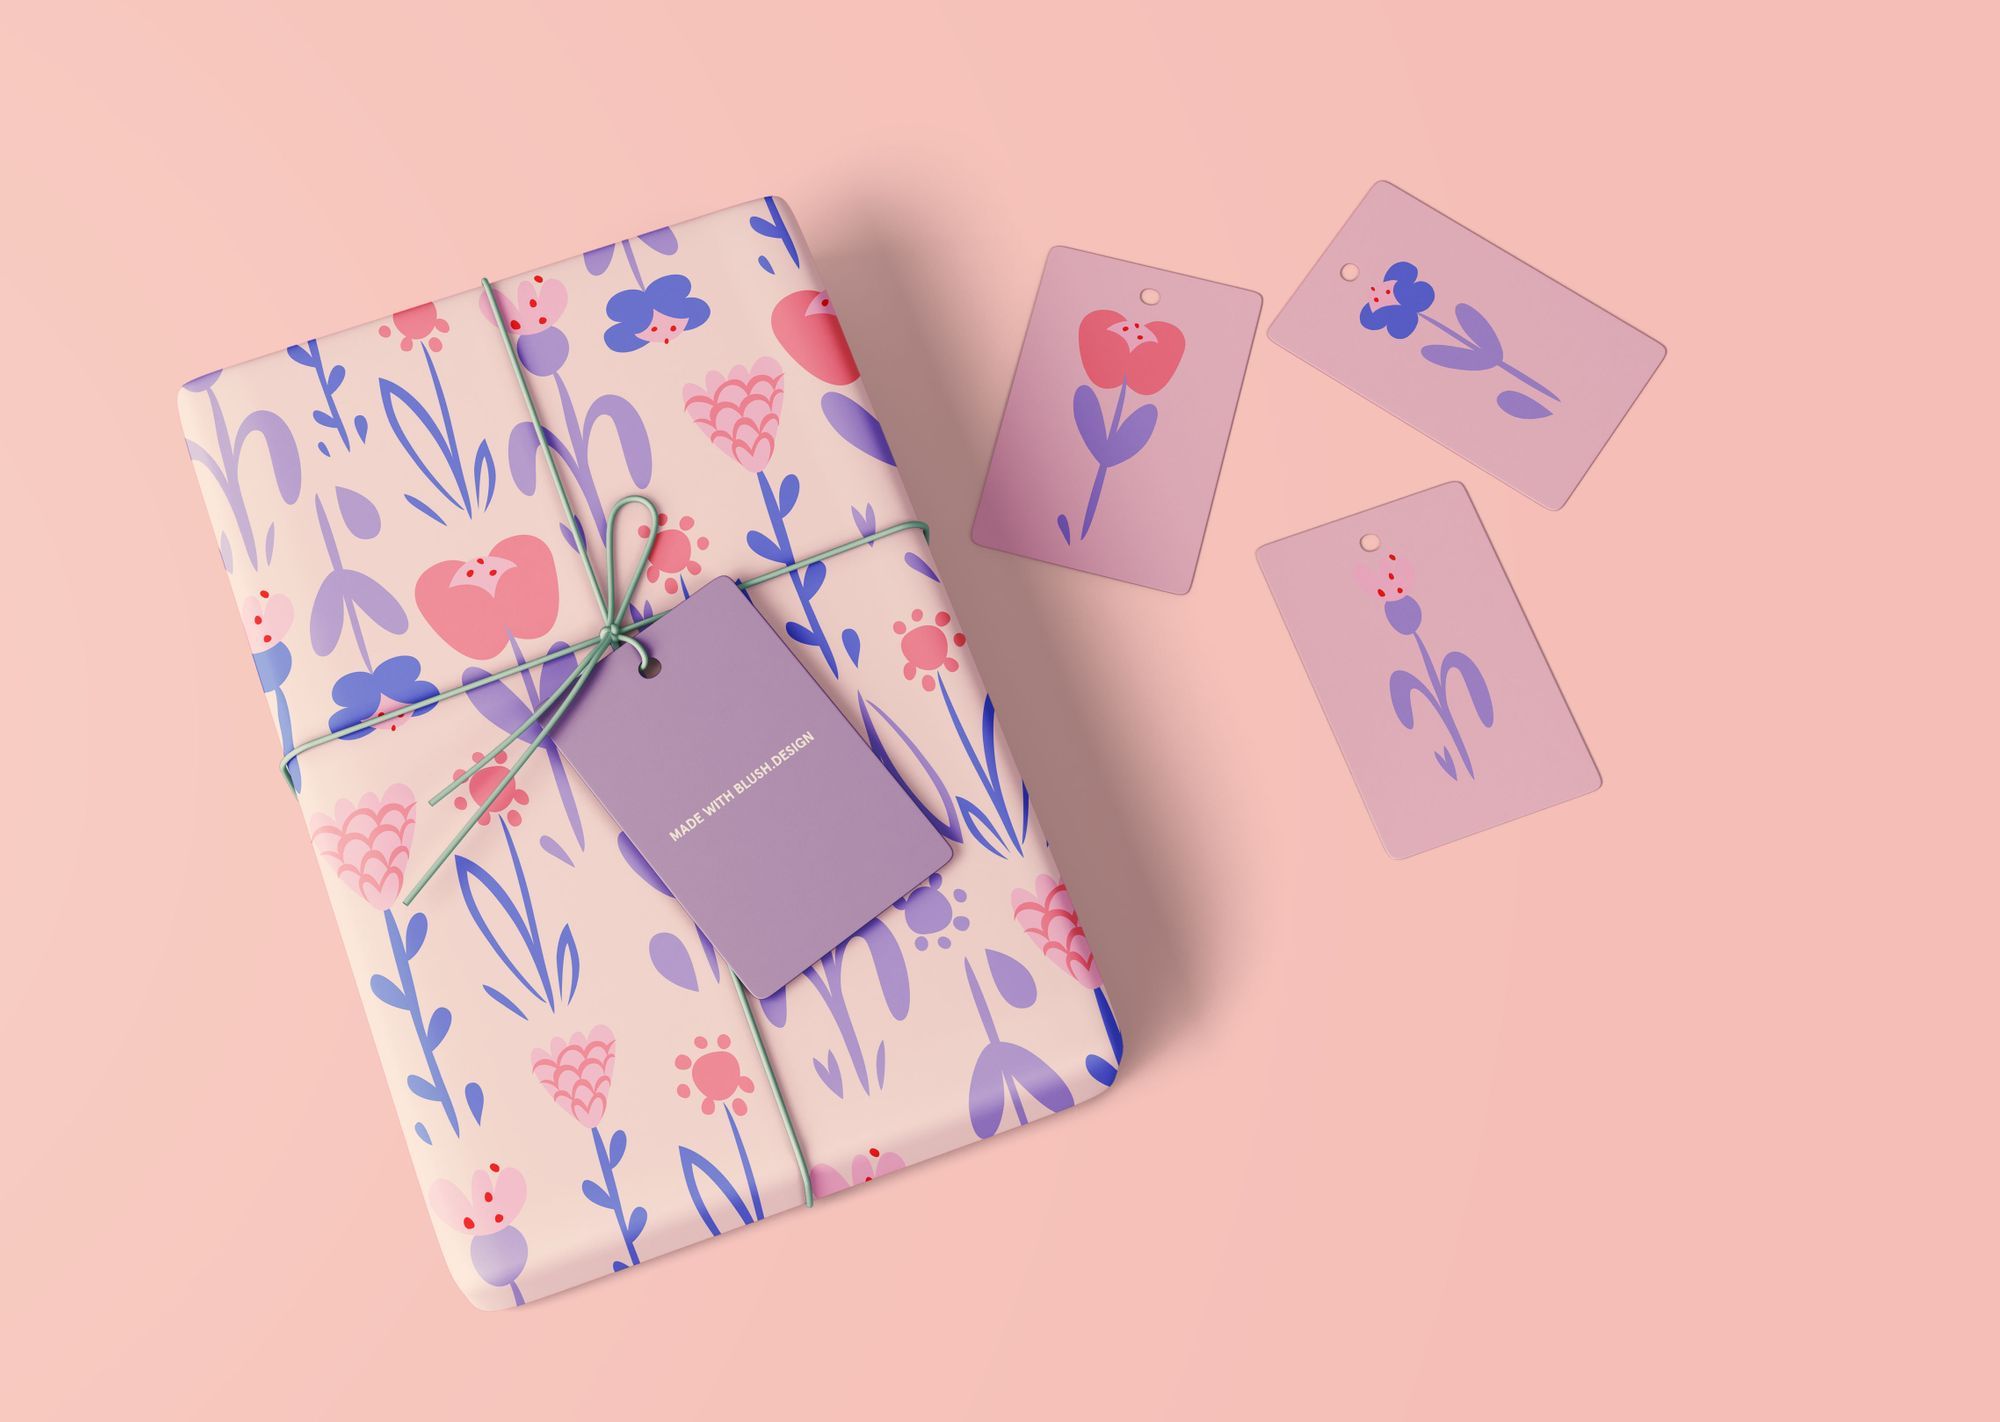 Packaging is an Art: 5 Eye-Catching Ways To Illustrate Your Packages